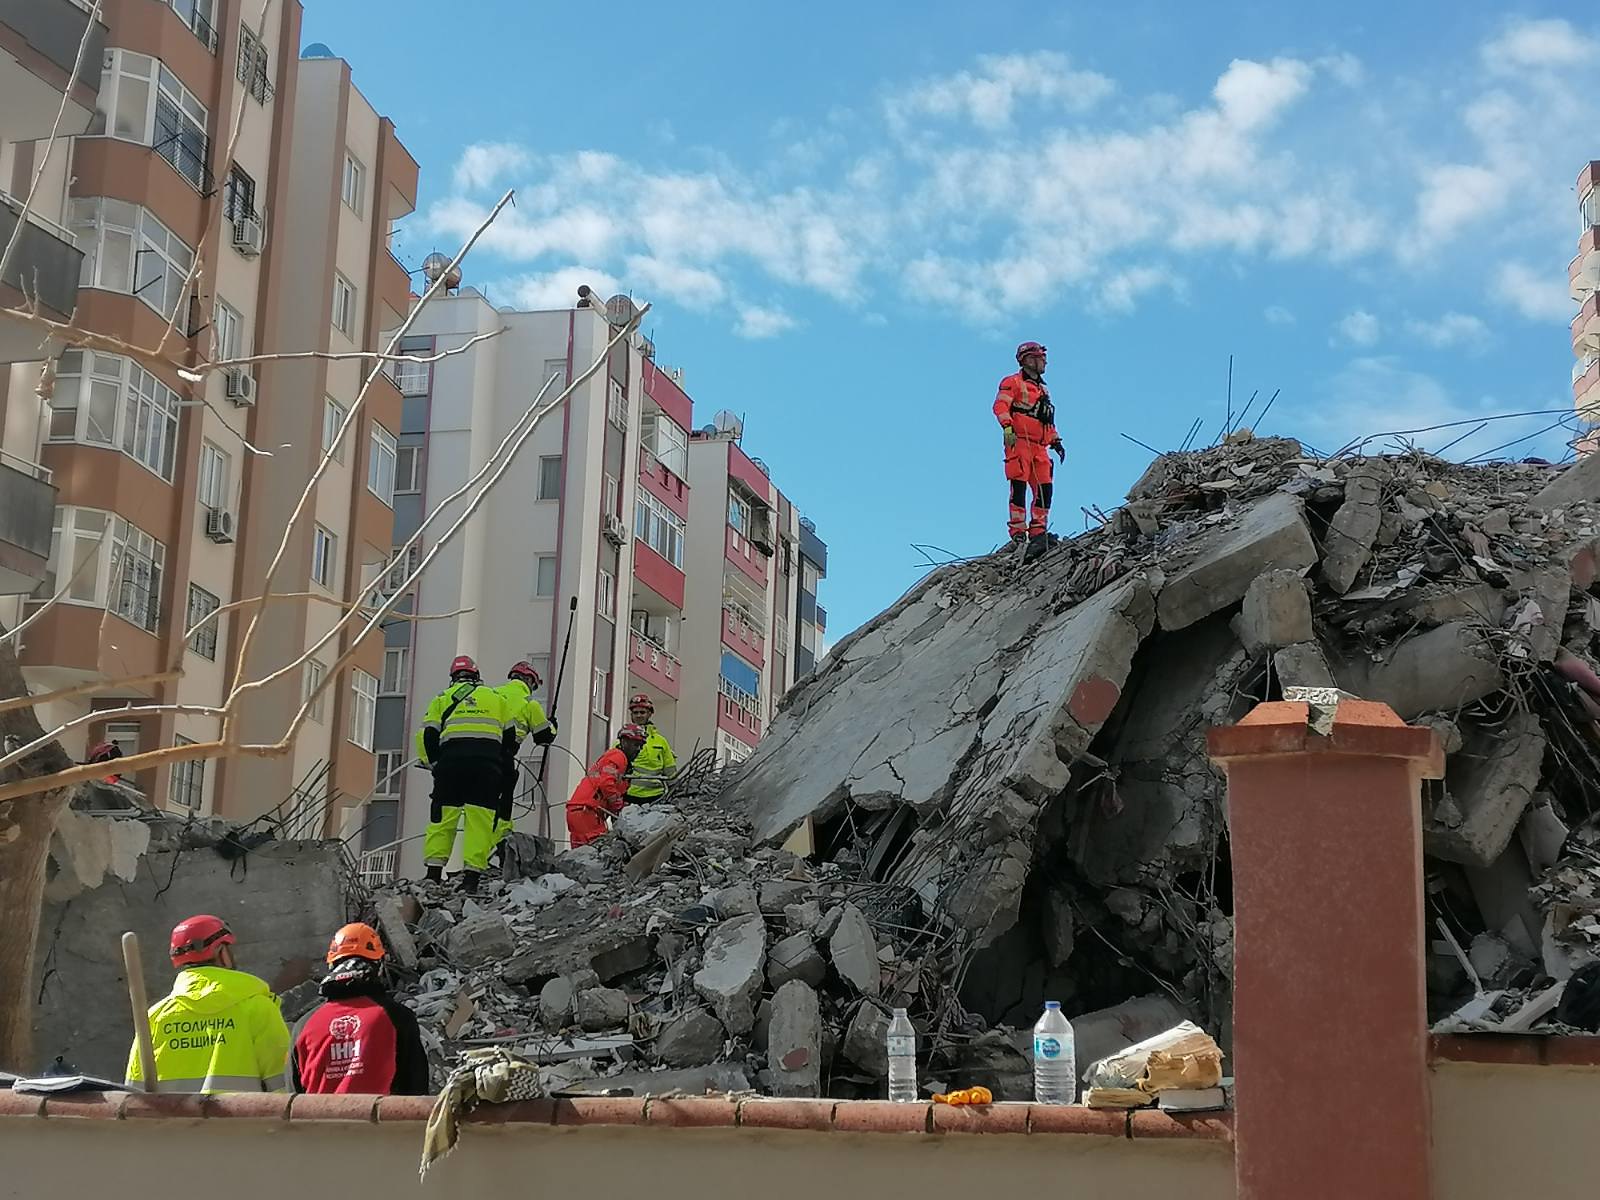 Collapsed buildings after the 7.8 magnitude earthquake in Turkey